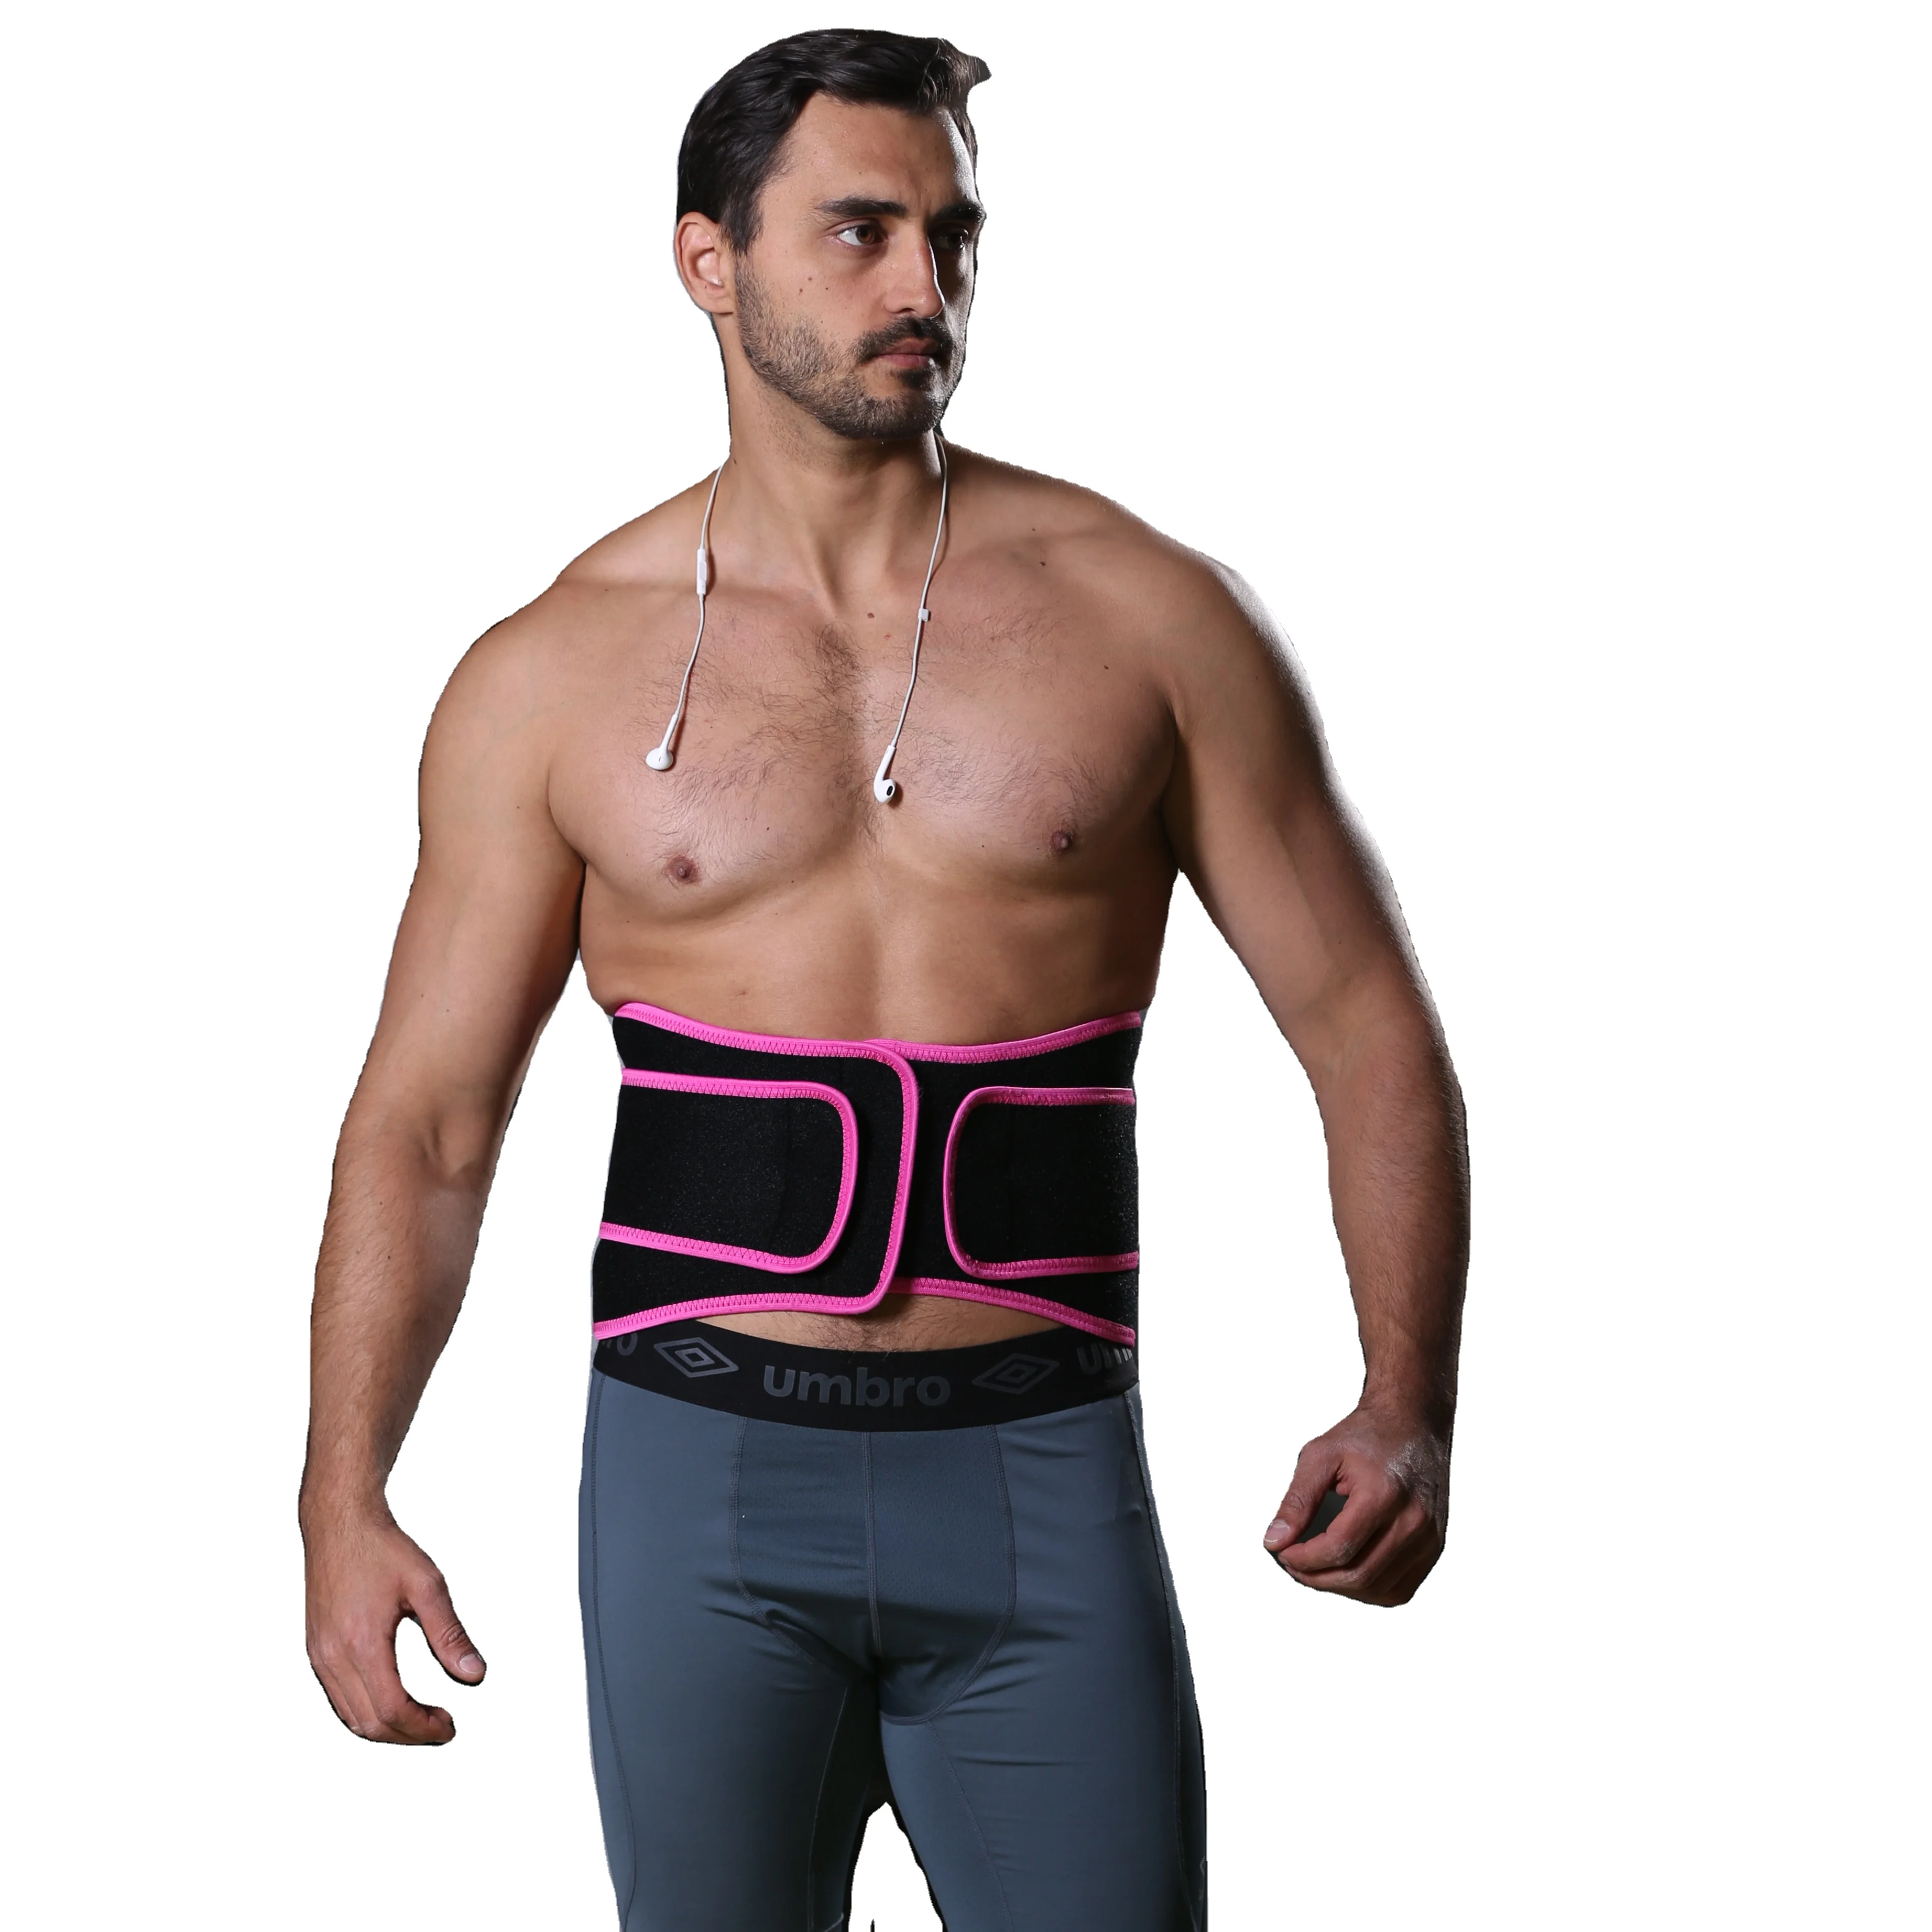 

Waist Trainer Slimming Body Shaper Belt - Sport Girdle Waist Trimmer Compression Belly Weight Loss, Black or customized color